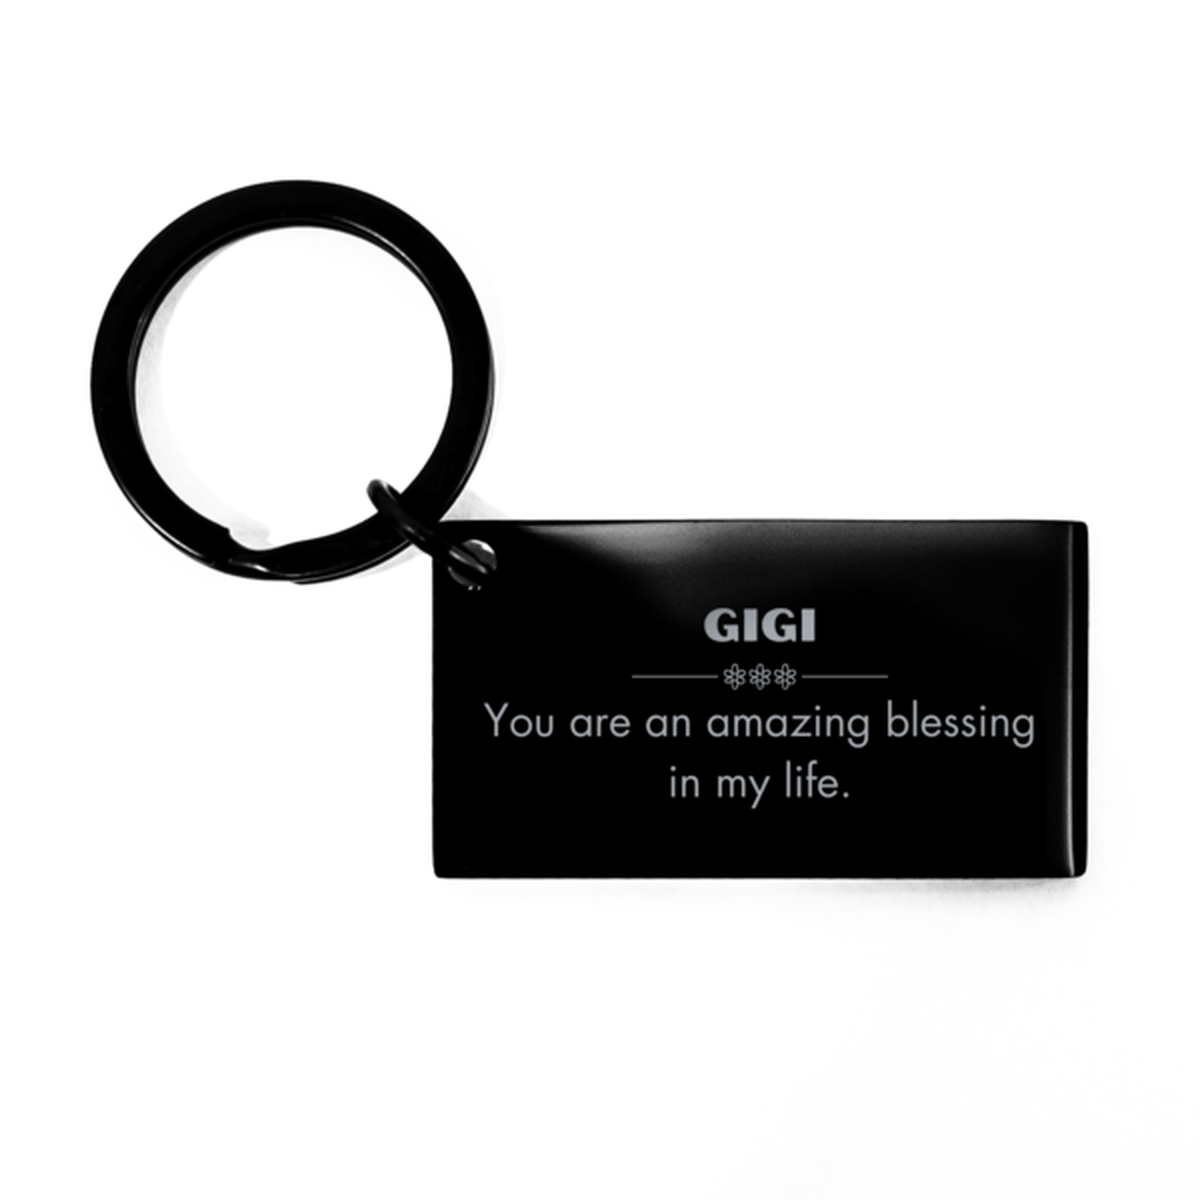 Gigi Keychain, You are an amazing blessing in my life, Thank You Gifts For Gigi, Inspirational Birthday Christmas Unique Gifts For Gigi